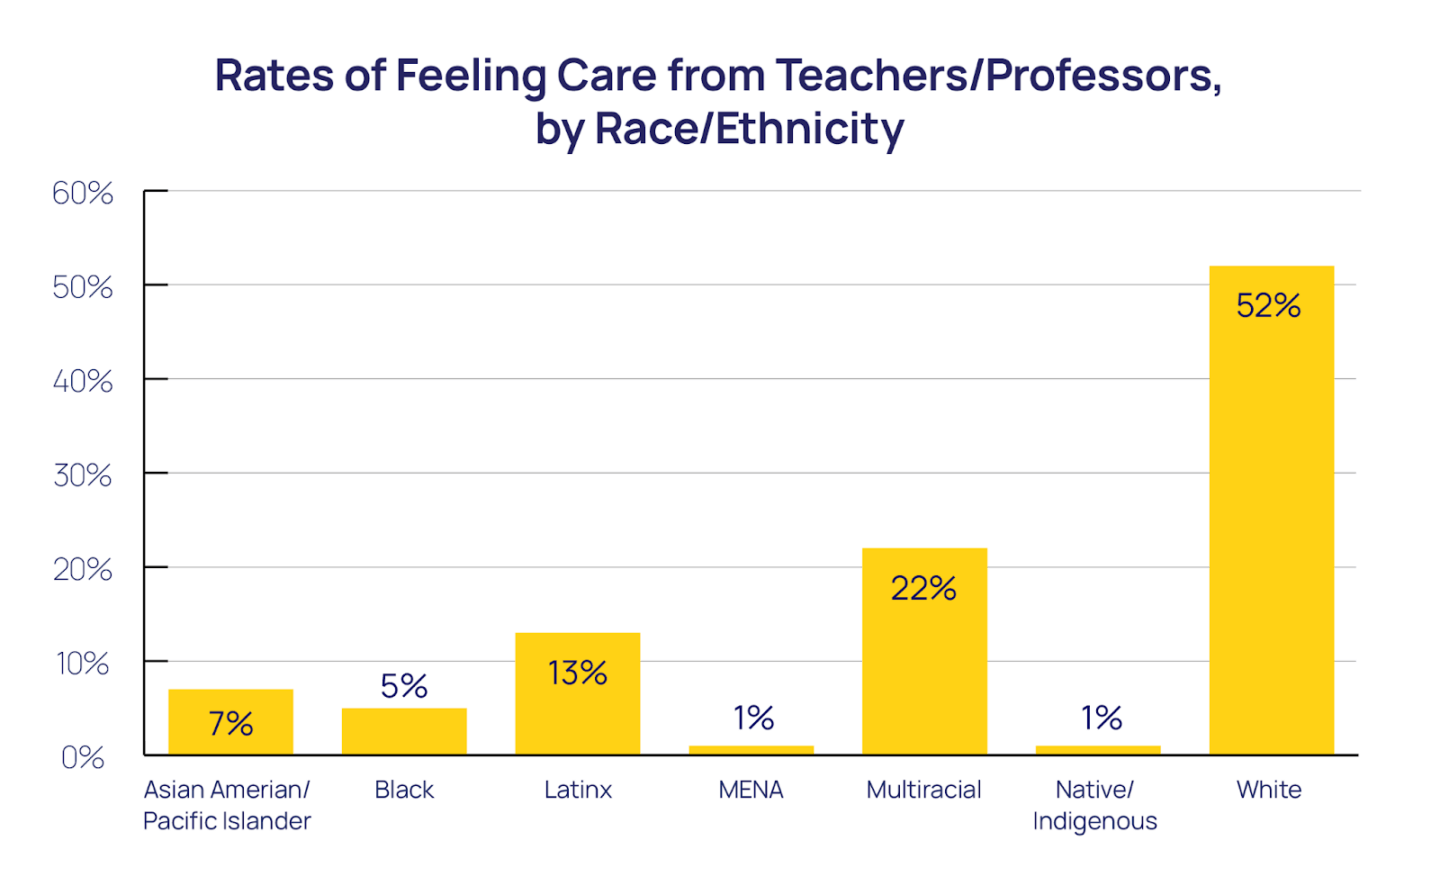 Rates of Feeling Care from Teachers/Professors, by Race/Ethnicity bar chart